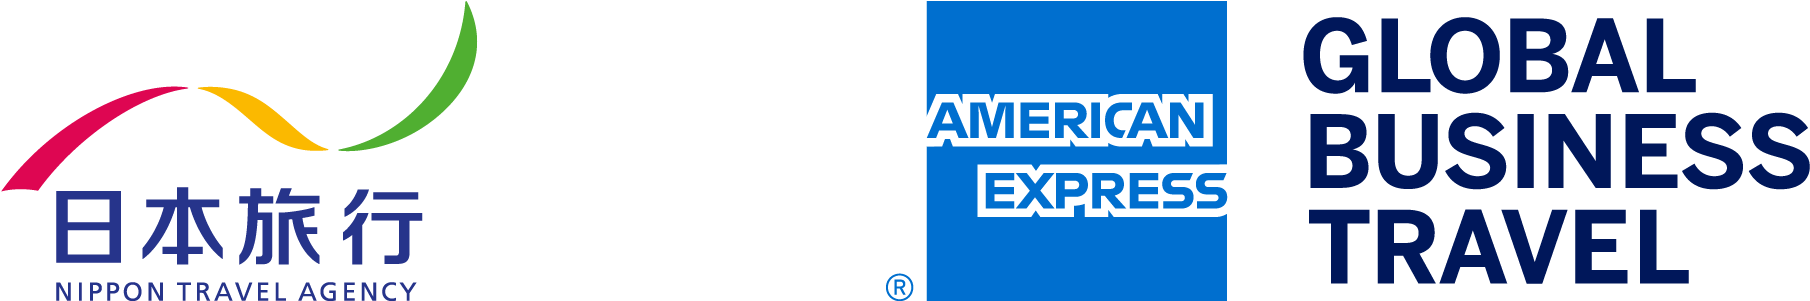 American Express Global Business Travel Partnership PNG